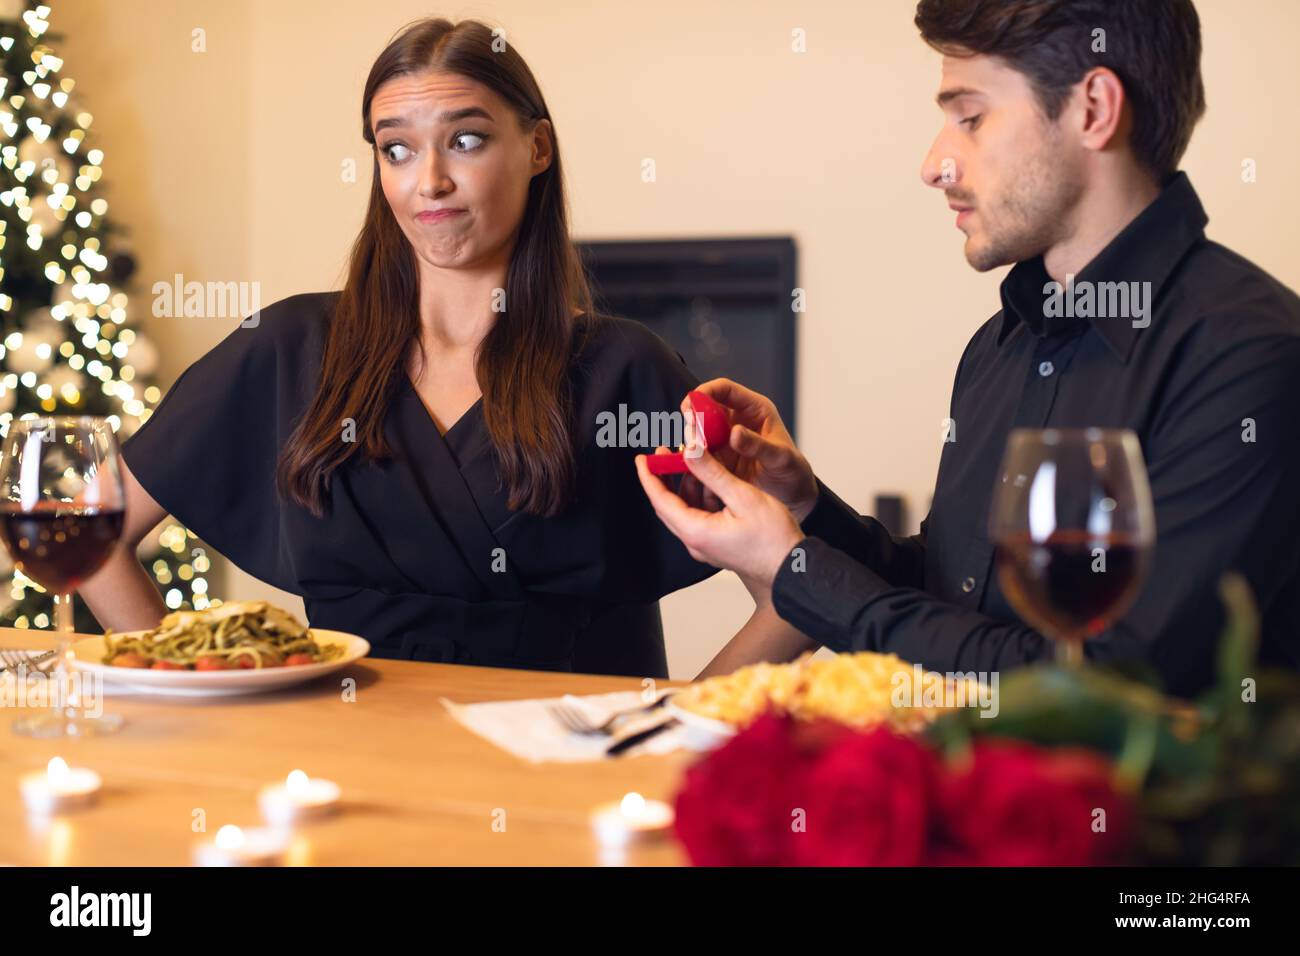 Man making proposal with ring, woman rejecting Stock Photo